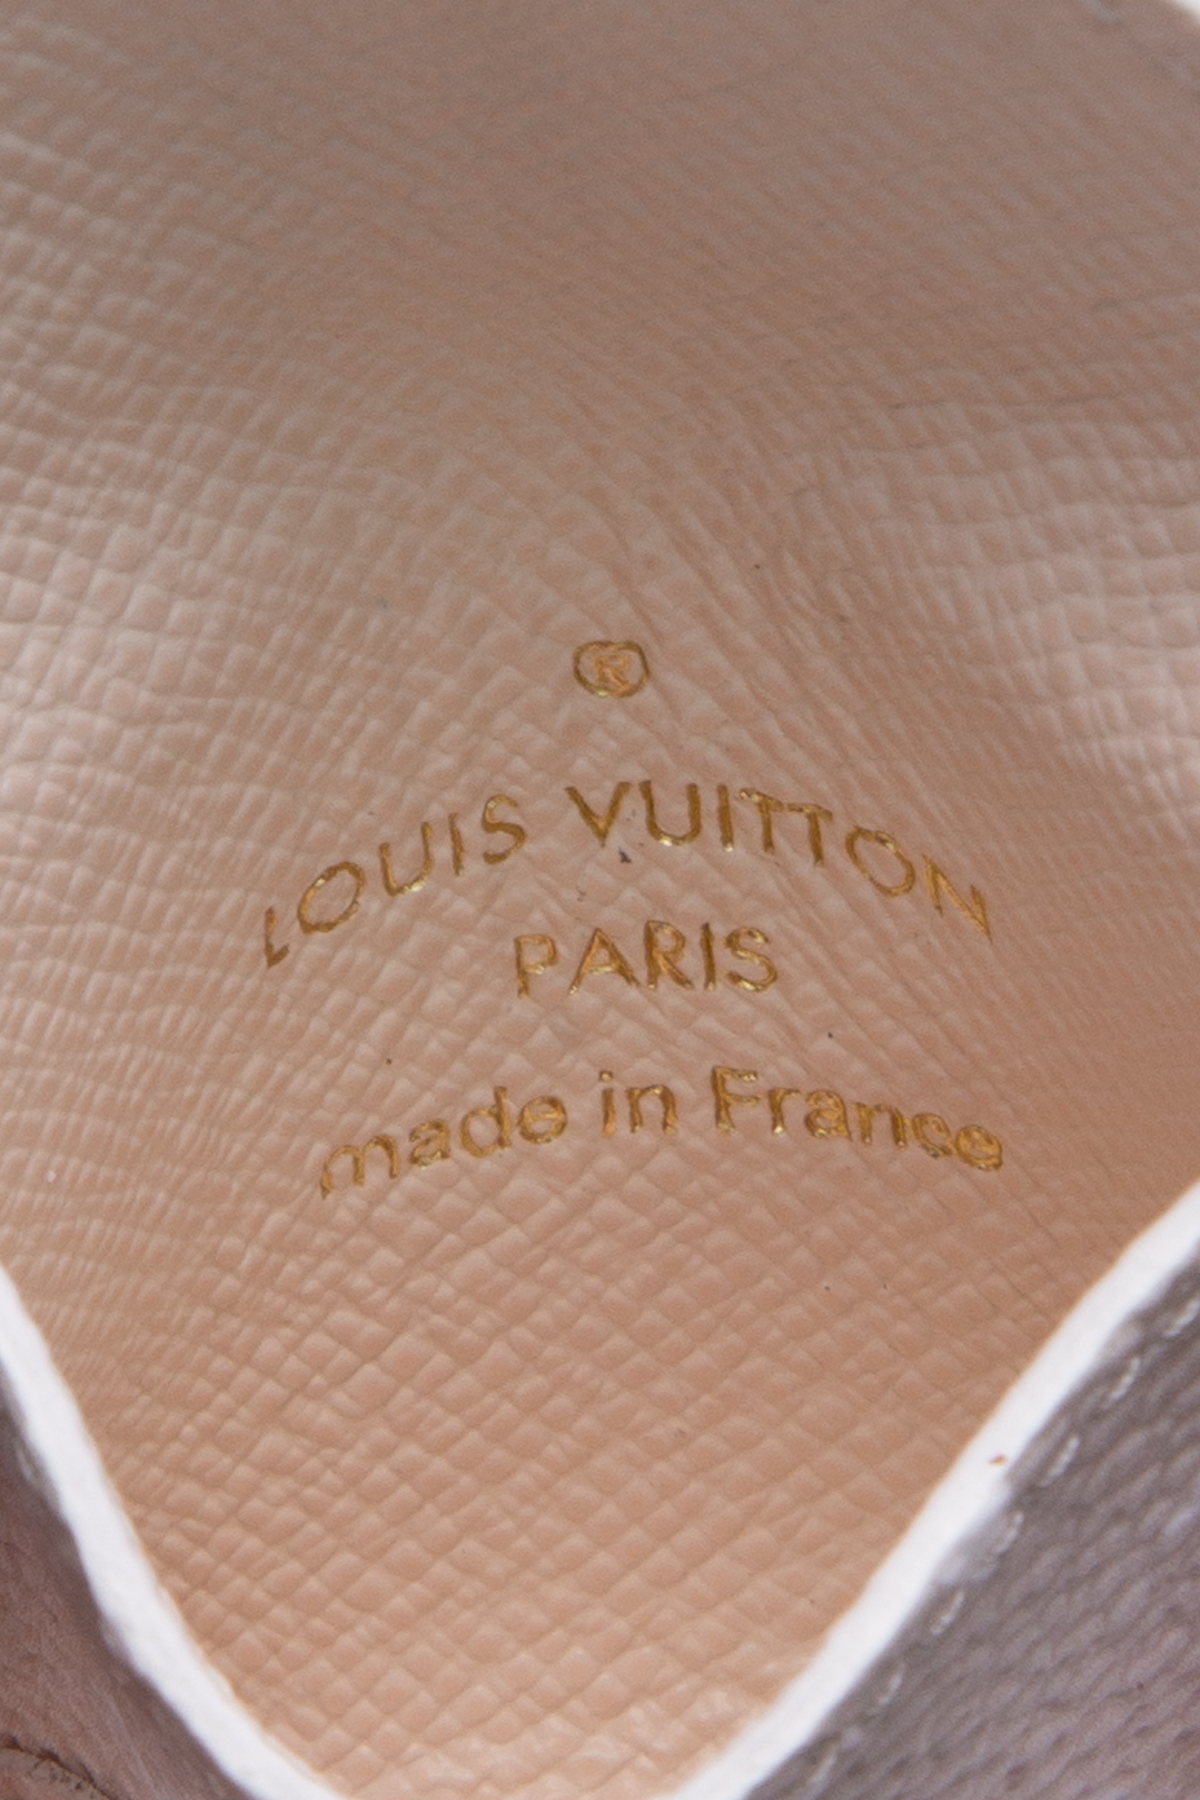 Louis Vuitton ByThePool Kirigami Pouch Bag Charm - Couture USA